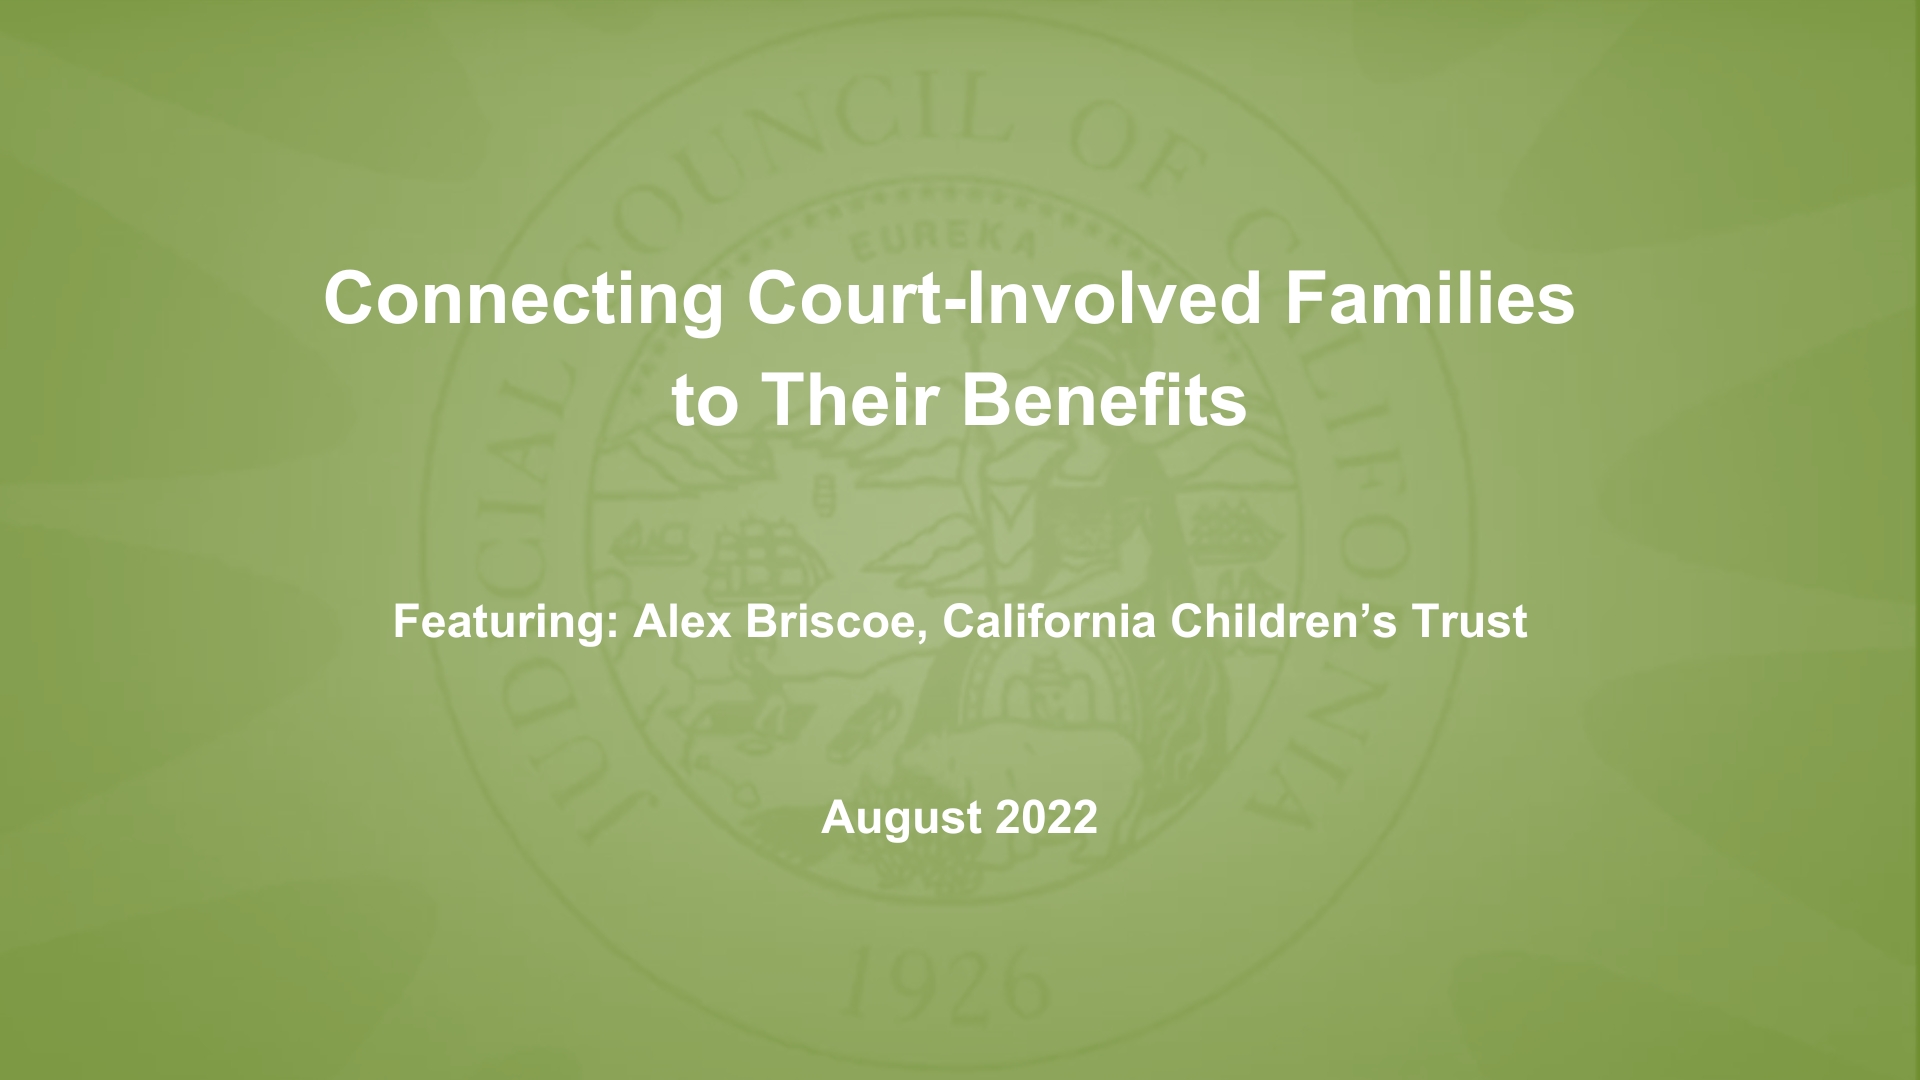 Connecting Court-Involved Families to Their Benefits